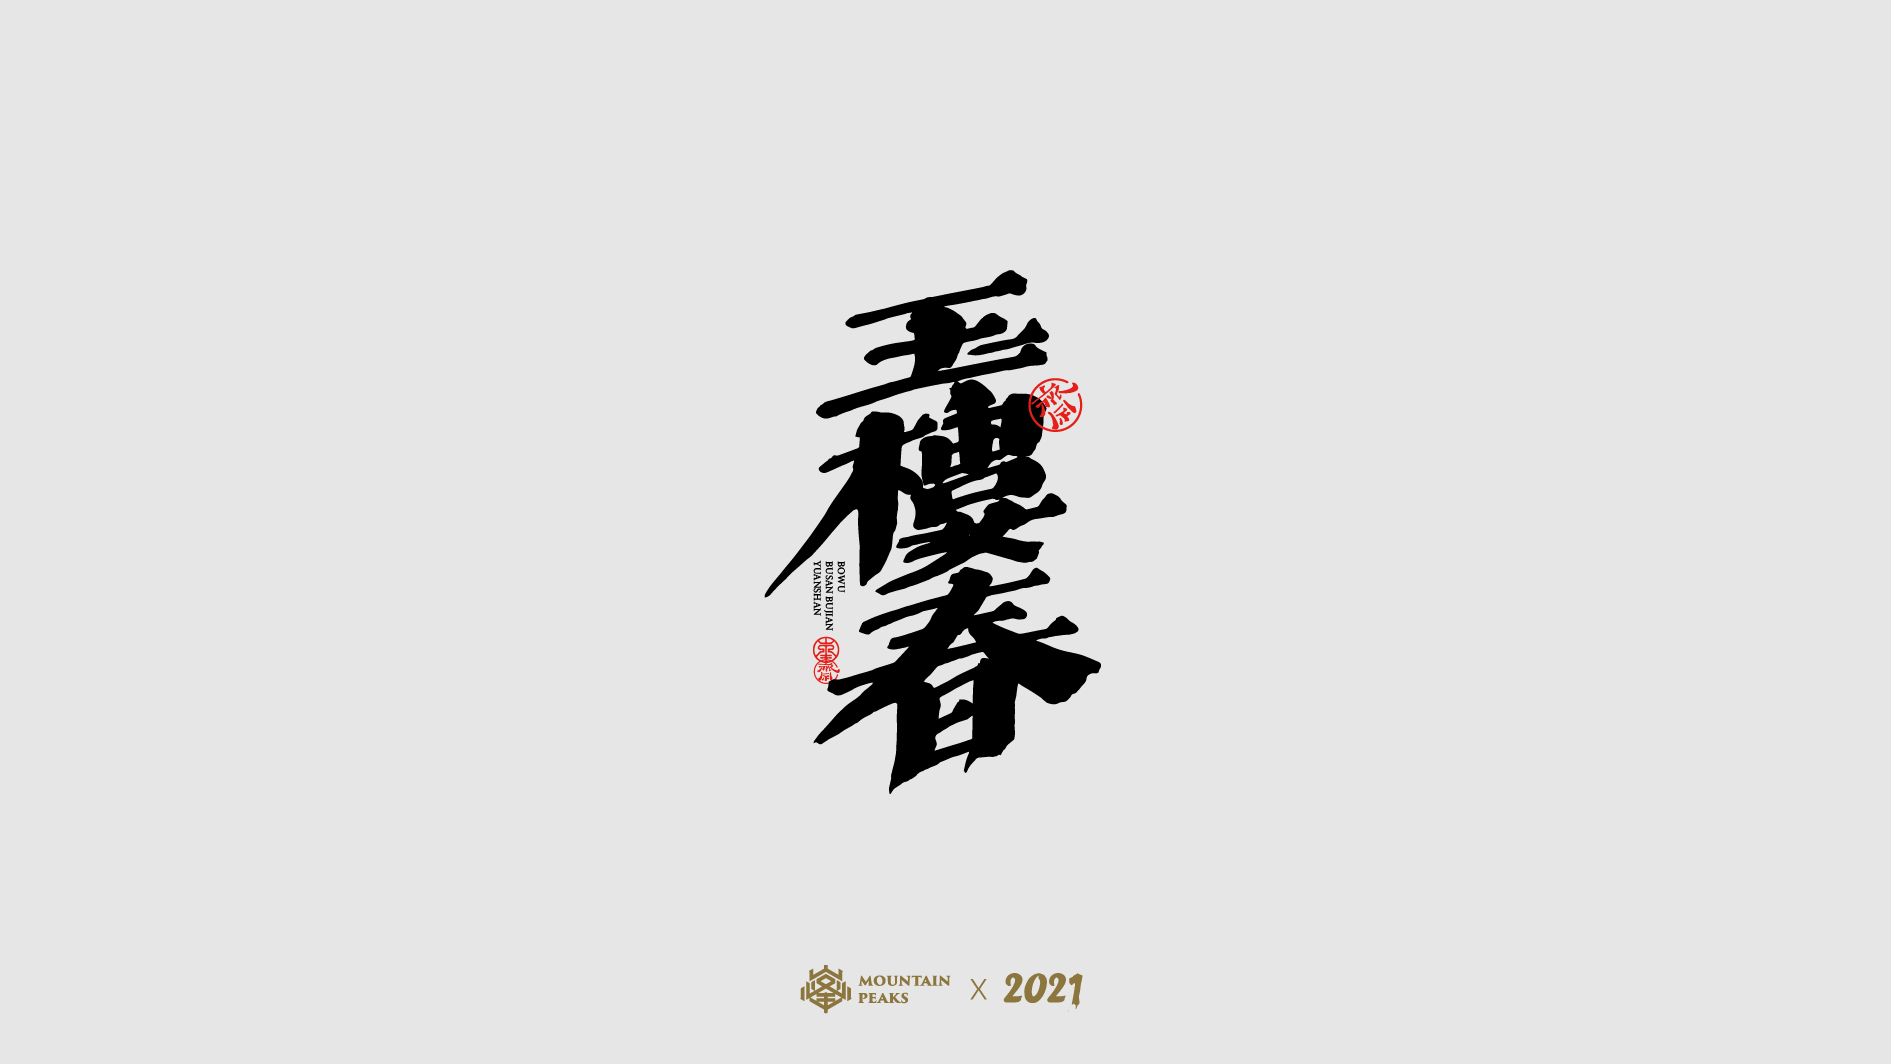 20P Collection of the latest Chinese font design schemes in 2021 #.595